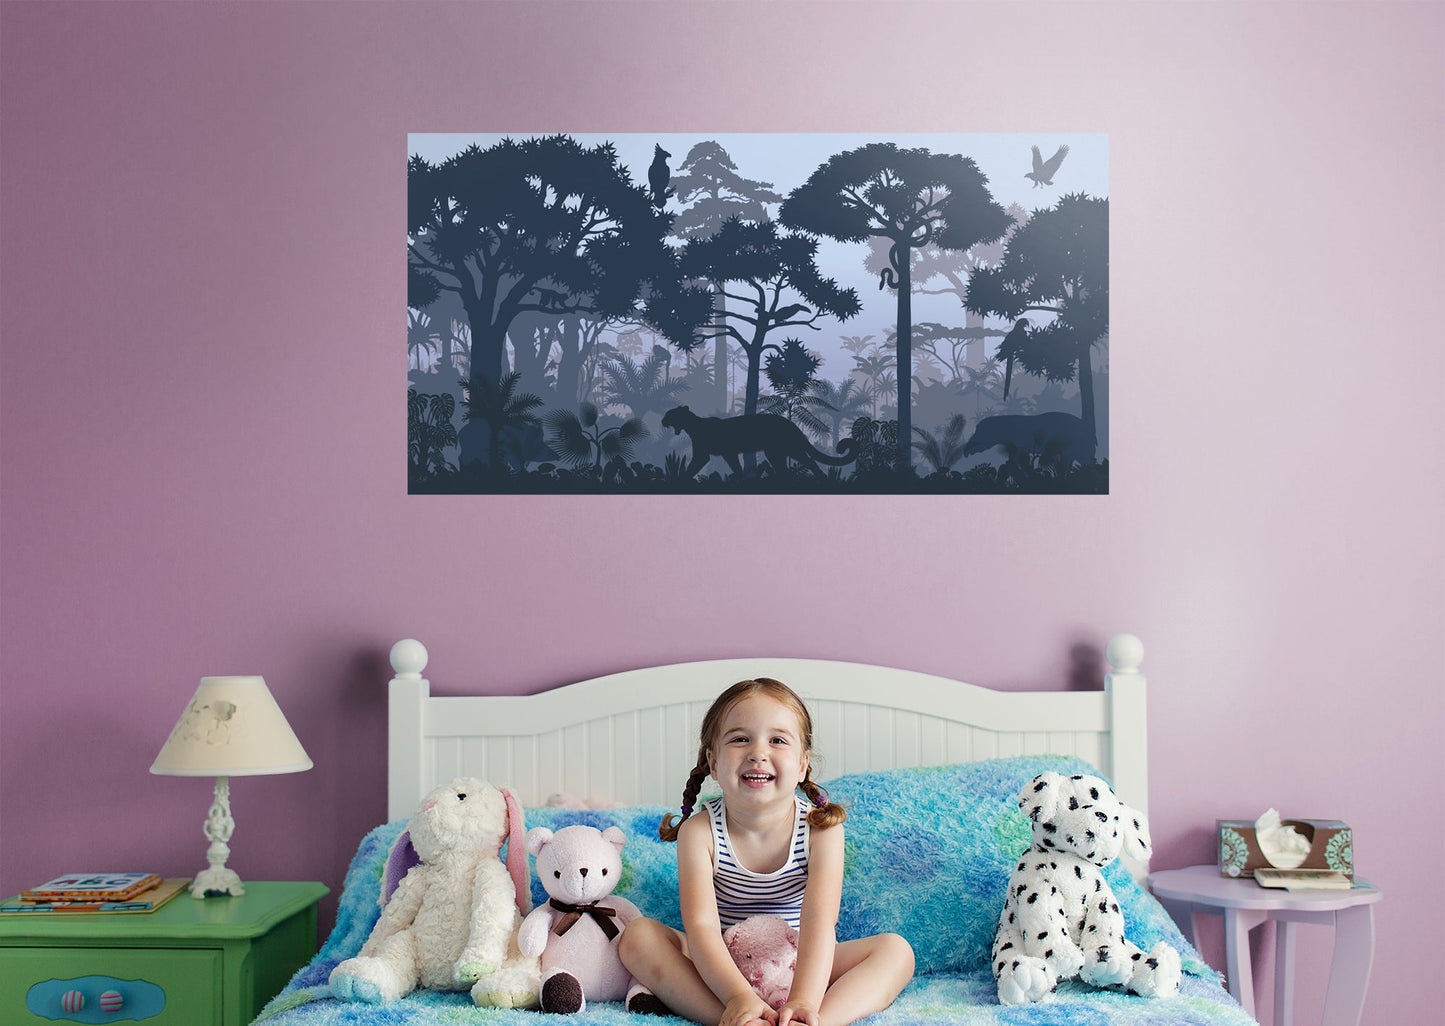 Jungle:  Foggy Mural        -   Removable Wall   Adhesive Decal